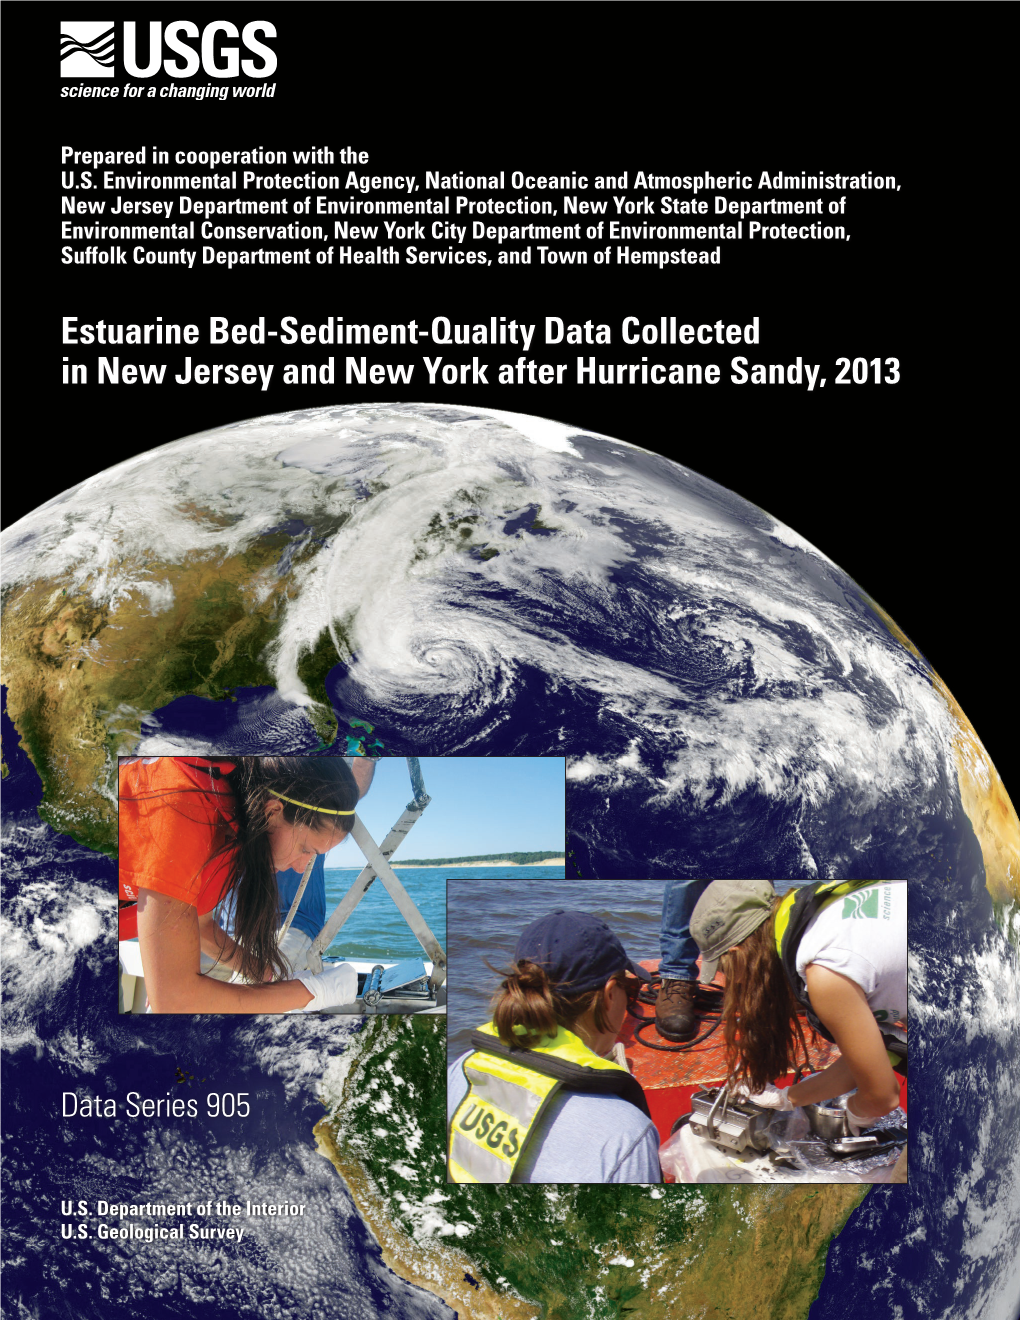 Estuarine Bed-Sediment-Quality Data Collected in New Jersey and New York After Hurricane Sandy, 2013